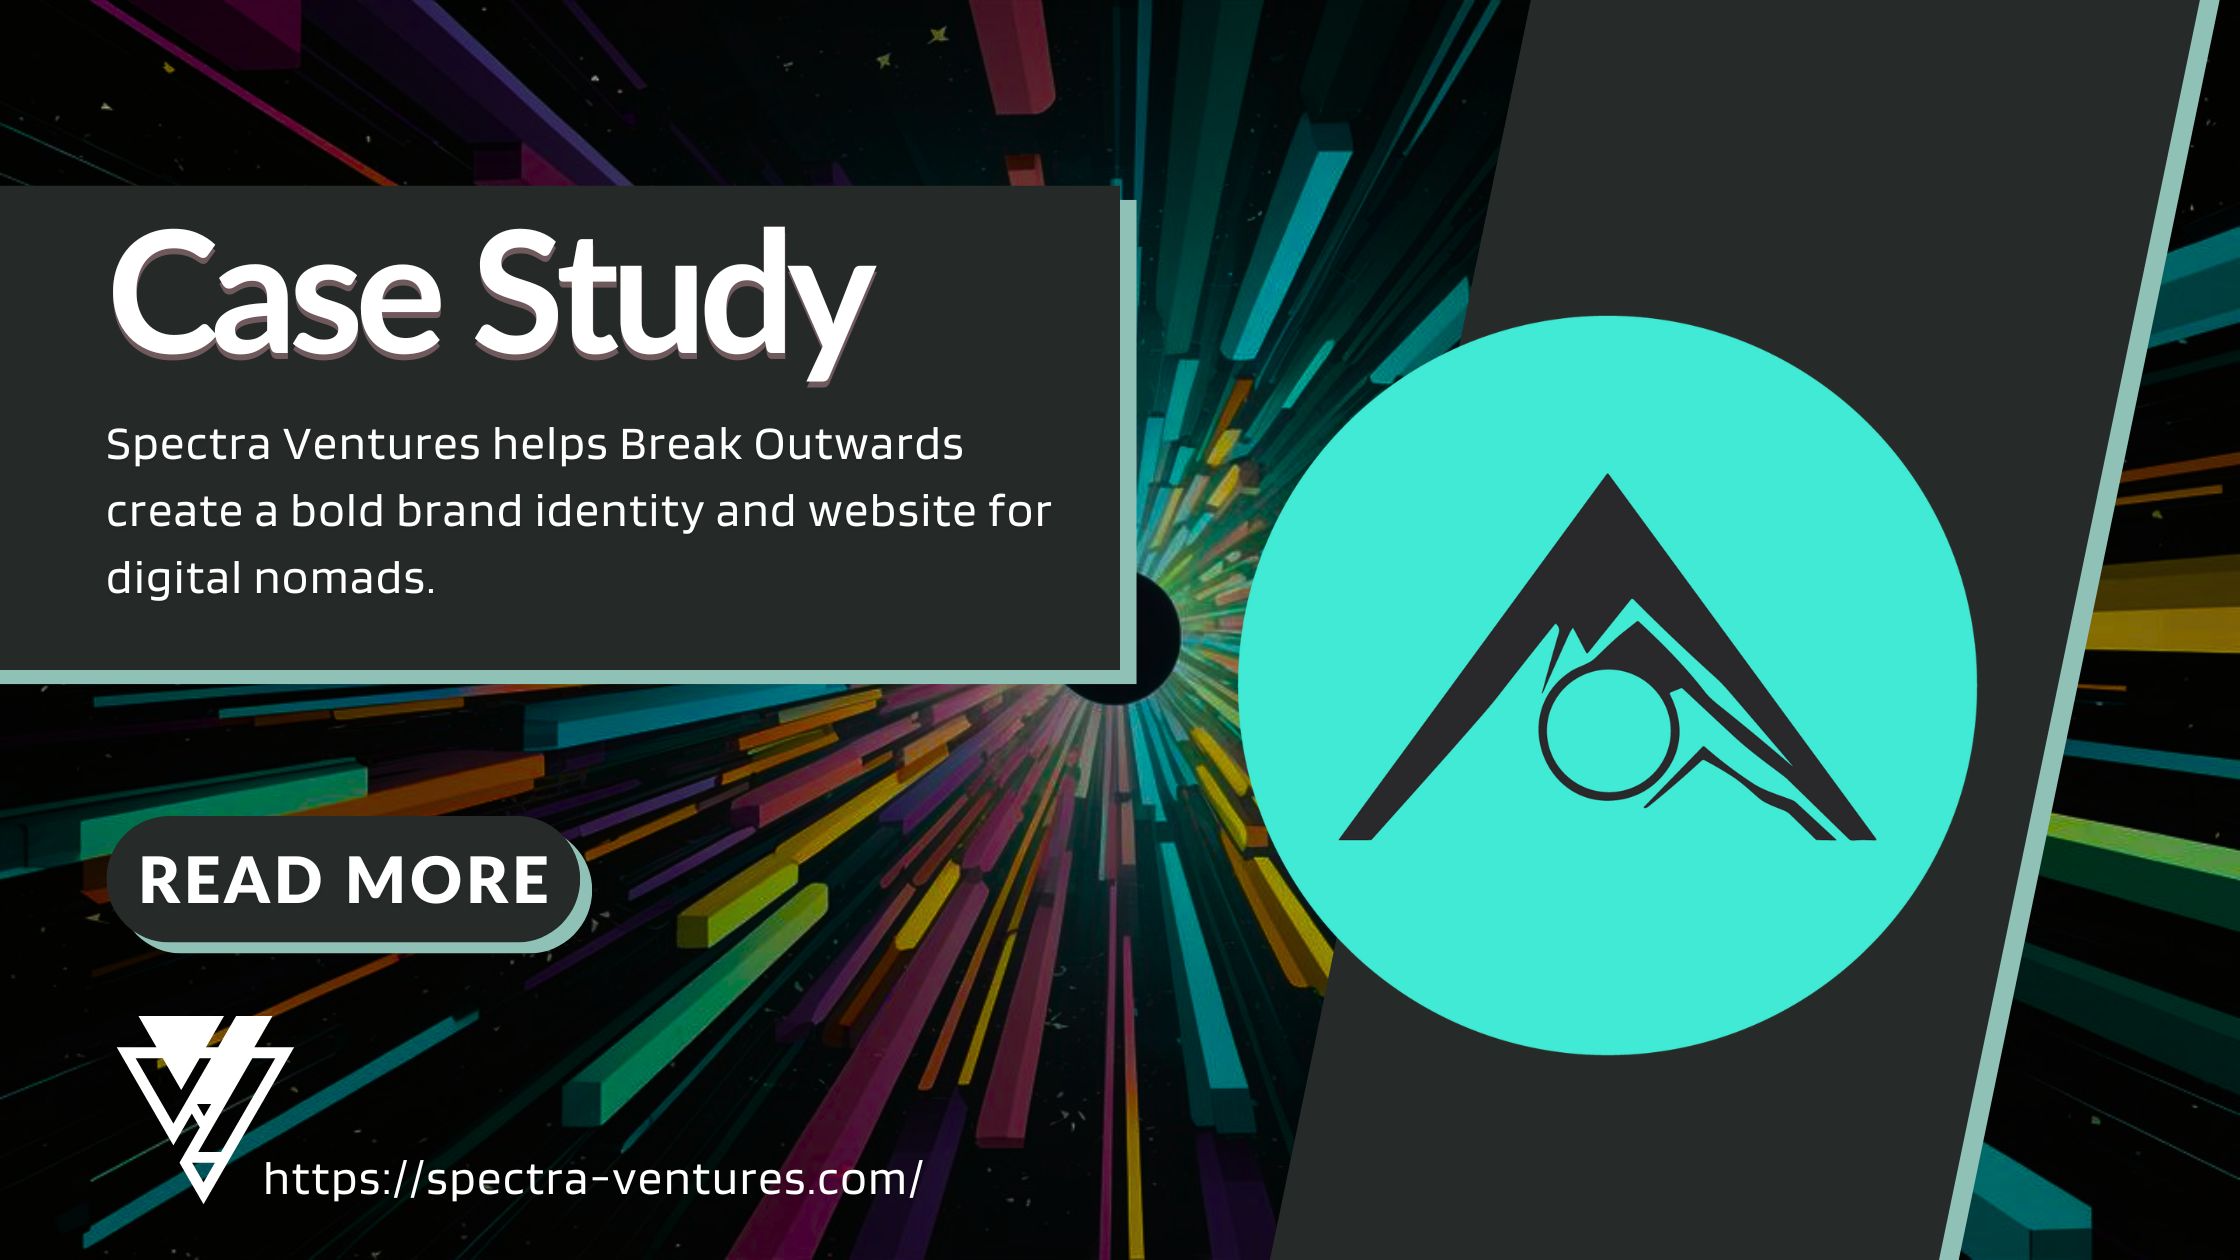 Spectra Ventures: Crafting Bold Brand Identity for Break Outwards